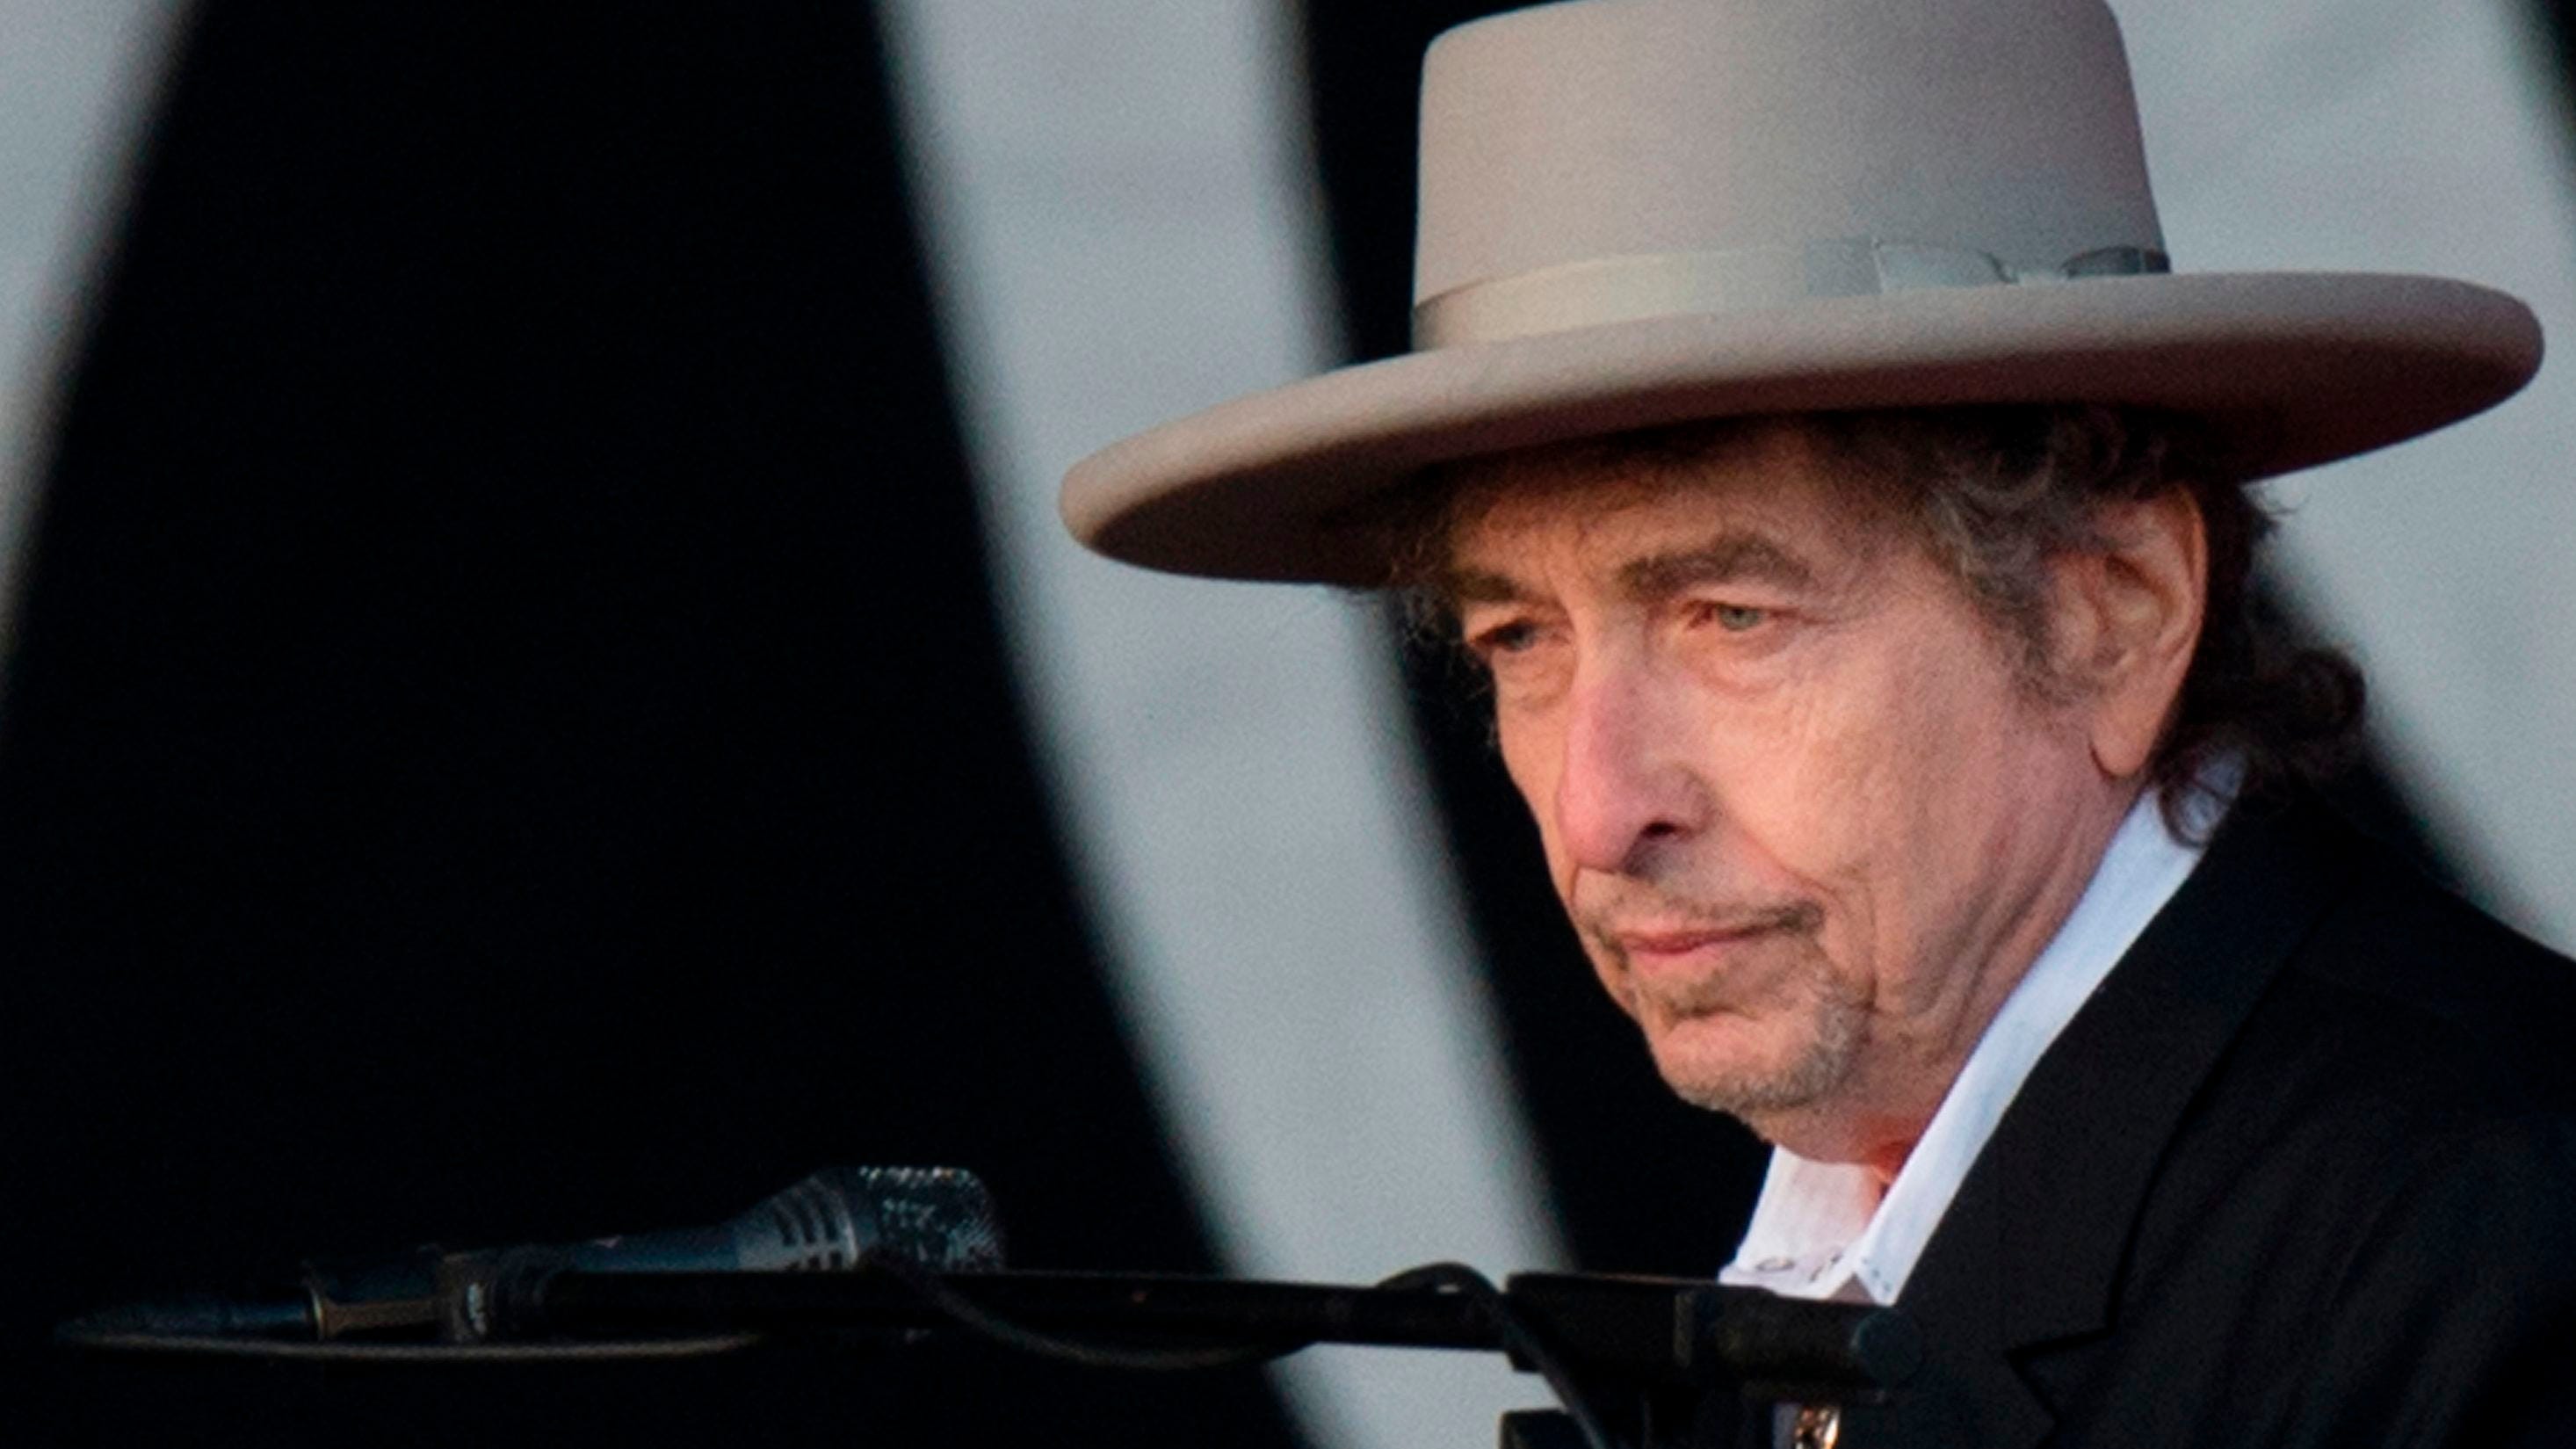 Bob Dylan Shares Fascinating New Interview, Triplicate Streams - Stereogum